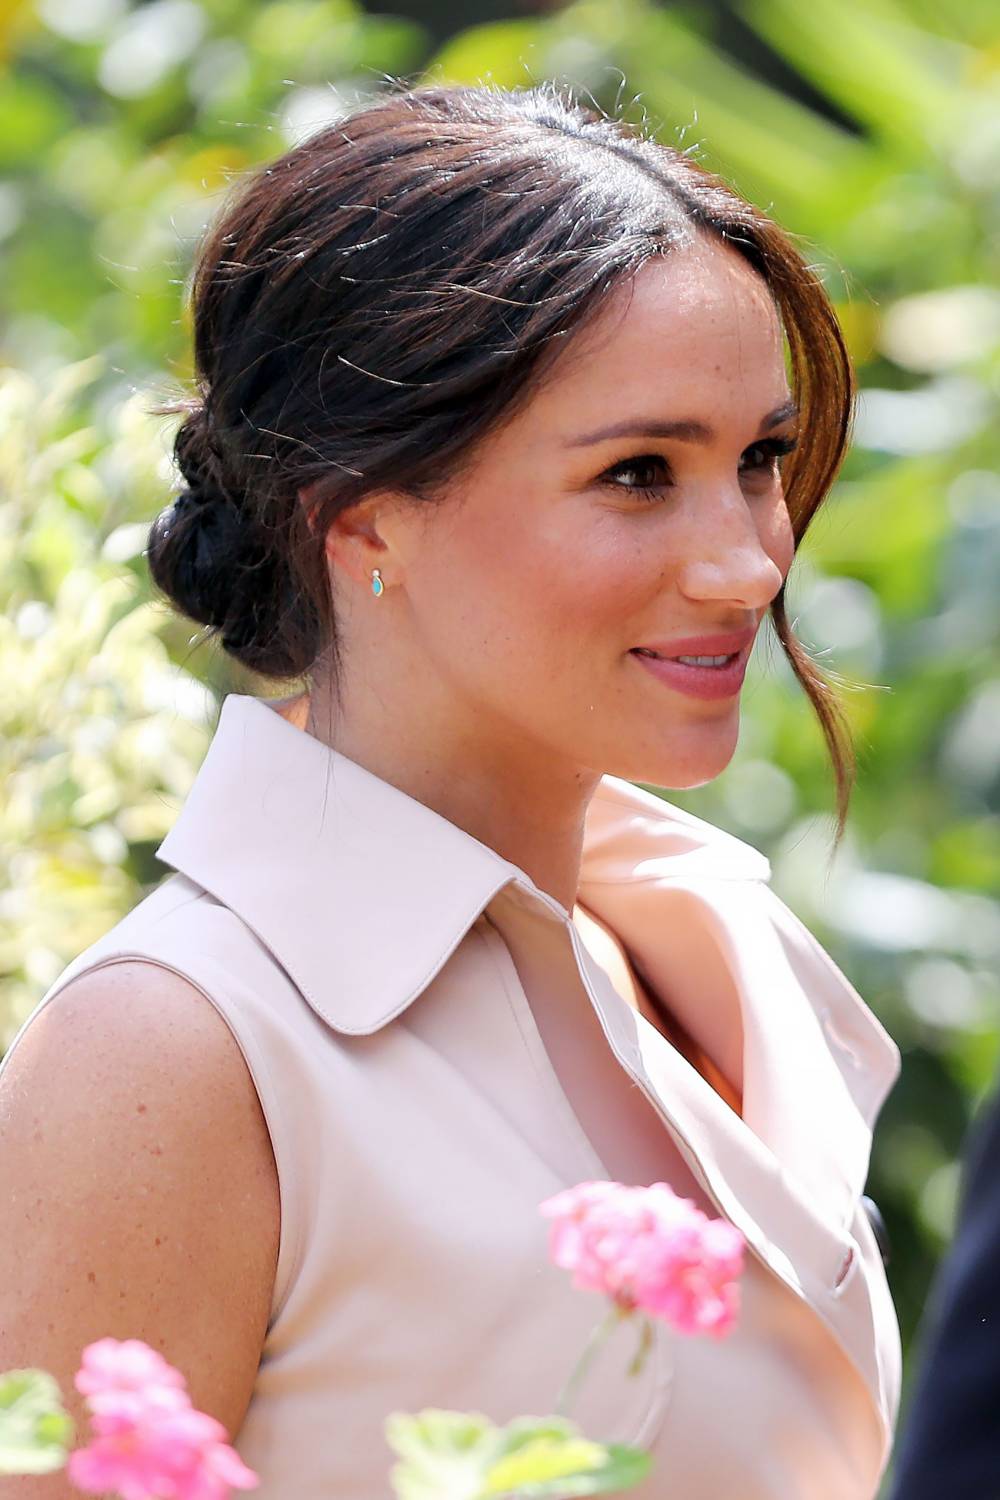 Meghan Markle's Messy Bun Was an Intentional Blend of Royal and Trendy